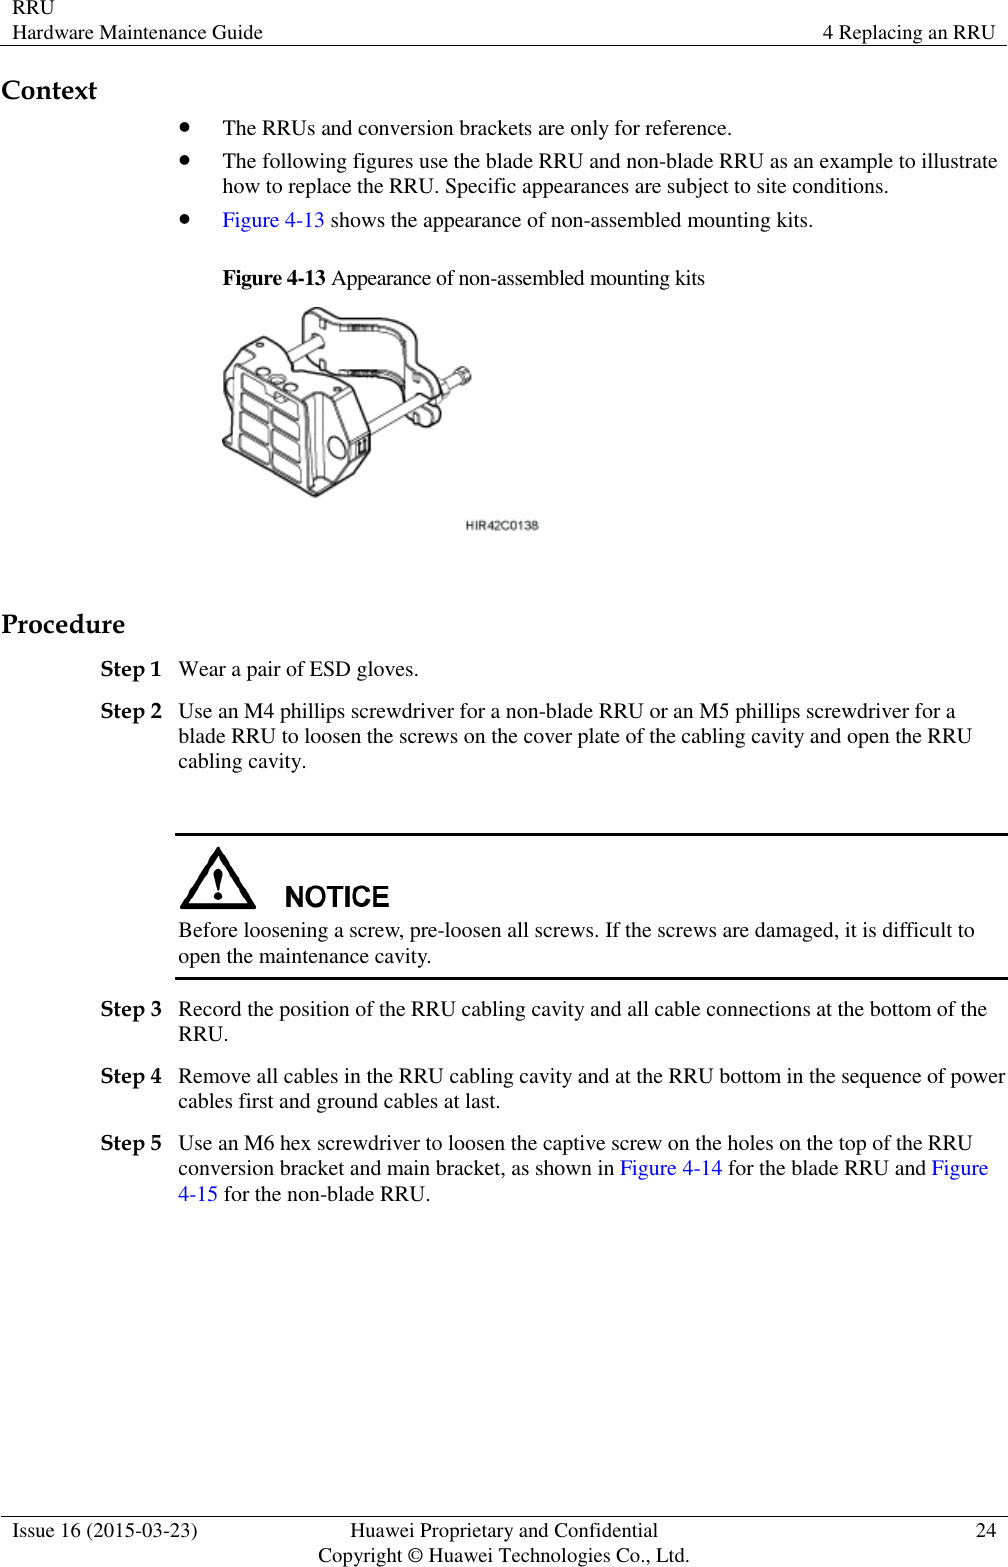 RRU Hardware Maintenance Guide 4 Replacing an RRU  Issue 16 (2015-03-23) Huawei Proprietary and Confidential                                     Copyright © Huawei Technologies Co., Ltd. 24  Context  The RRUs and conversion brackets are only for reference.  The following figures use the blade RRU and non-blade RRU as an example to illustrate how to replace the RRU. Specific appearances are subject to site conditions.  Figure 4-13 shows the appearance of non-assembled mounting kits. Figure 4-13 Appearance of non-assembled mounting kits   Procedure Step 1 Wear a pair of ESD gloves. Step 2 Use an M4 phillips screwdriver for a non-blade RRU or an M5 phillips screwdriver for a blade RRU to loosen the screws on the cover plate of the cabling cavity and open the RRU cabling cavity.   Before loosening a screw, pre-loosen all screws. If the screws are damaged, it is difficult to open the maintenance cavity. Step 3 Record the position of the RRU cabling cavity and all cable connections at the bottom of the RRU. Step 4 Remove all cables in the RRU cabling cavity and at the RRU bottom in the sequence of power cables first and ground cables at last. Step 5 Use an M6 hex screwdriver to loosen the captive screw on the holes on the top of the RRU conversion bracket and main bracket, as shown in Figure 4-14 for the blade RRU and Figure 4-15 for the non-blade RRU. 